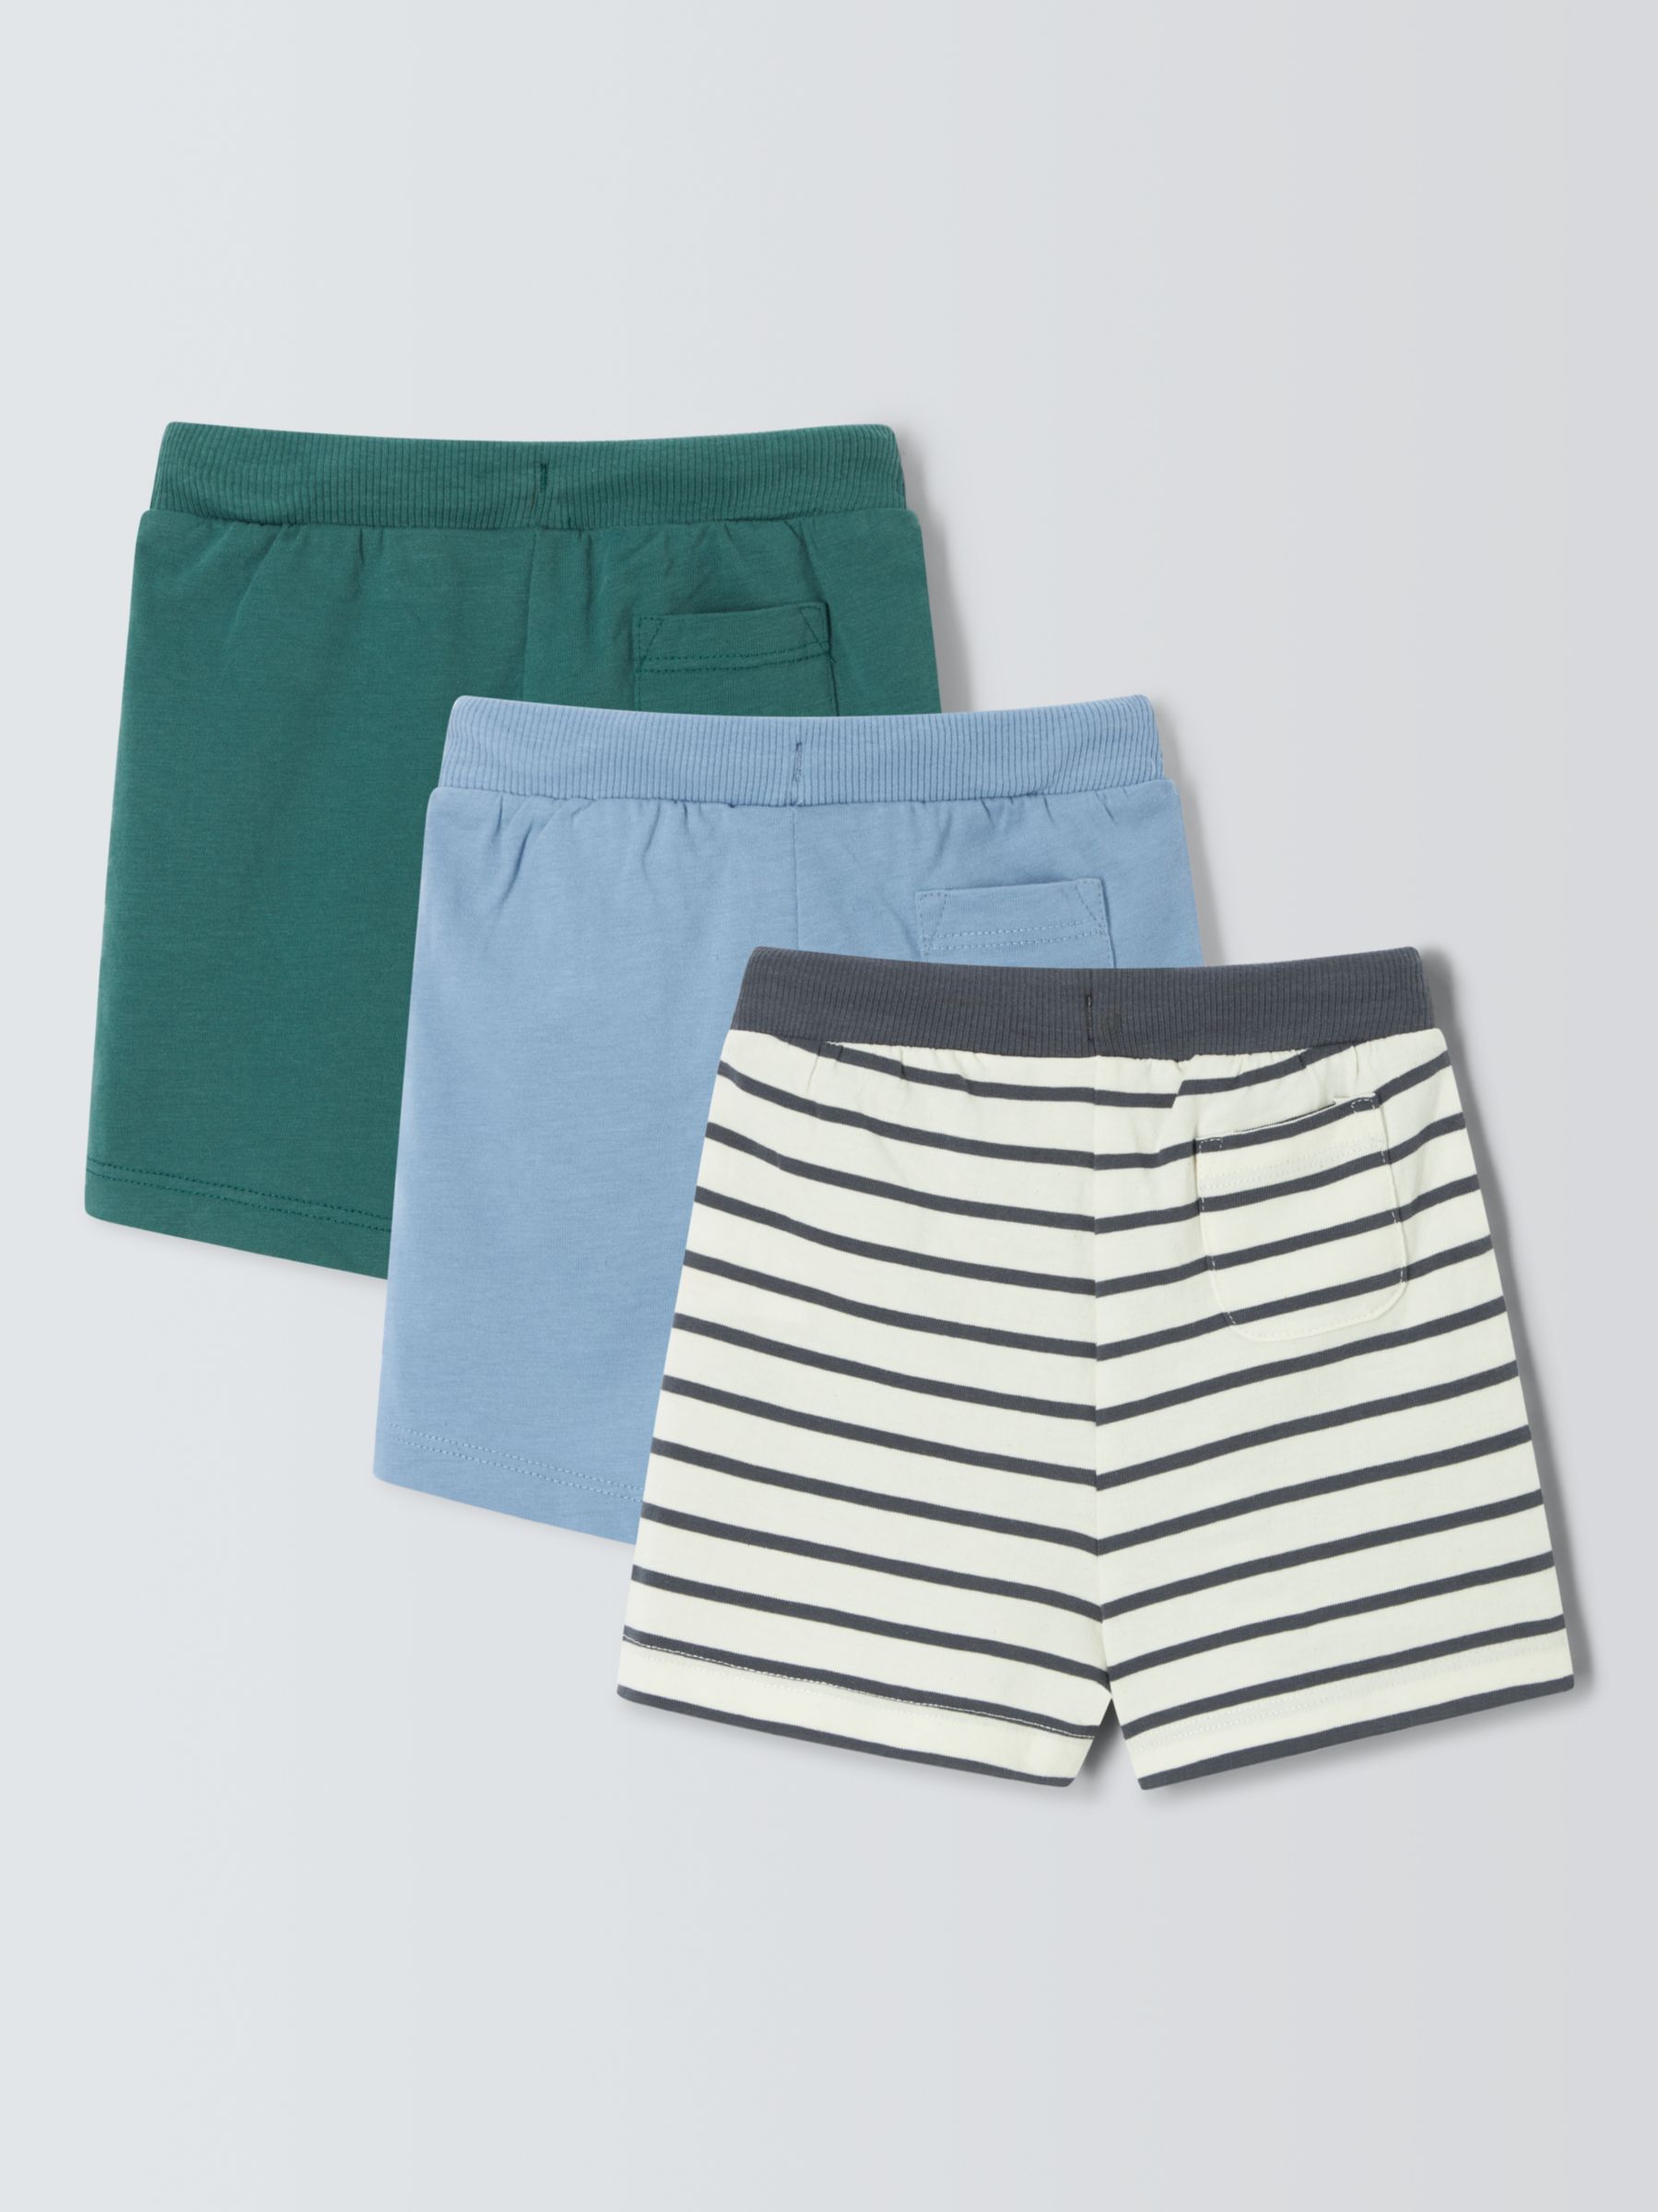 Buy John Lewis Baby Colourblock and Striped Shorts, Pack of 3, Multi Online at johnlewis.com